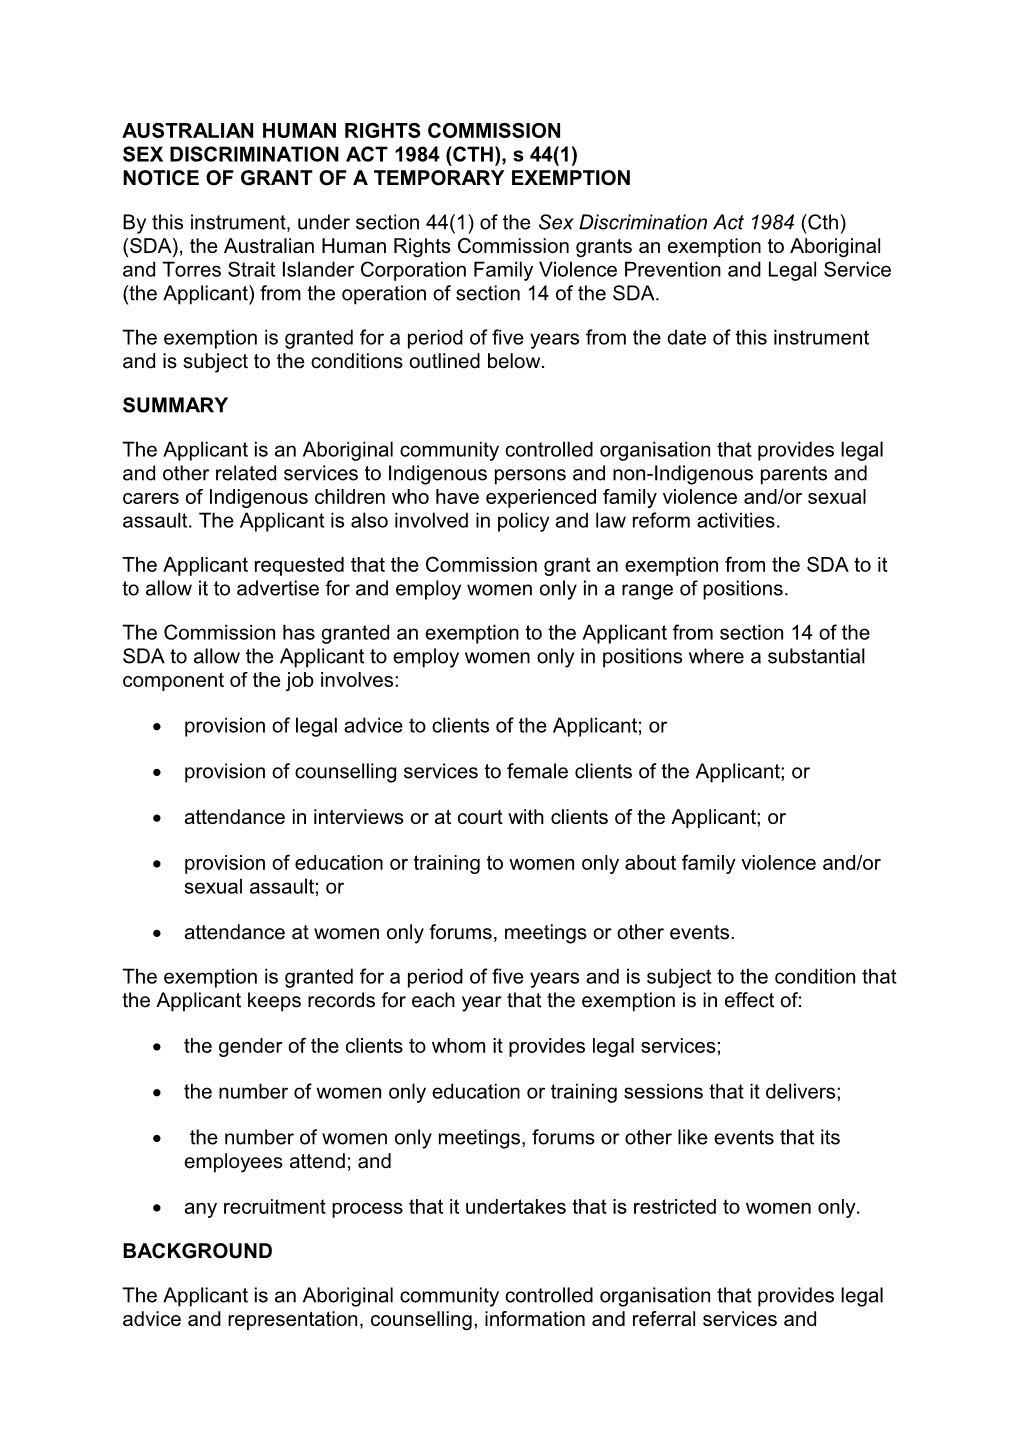 AUSTRALIAN HUMAN RIGHTS COMMISSION SEX DISCRIMINATION ACT 1984 (CTH), S44(1) NOTICE OF